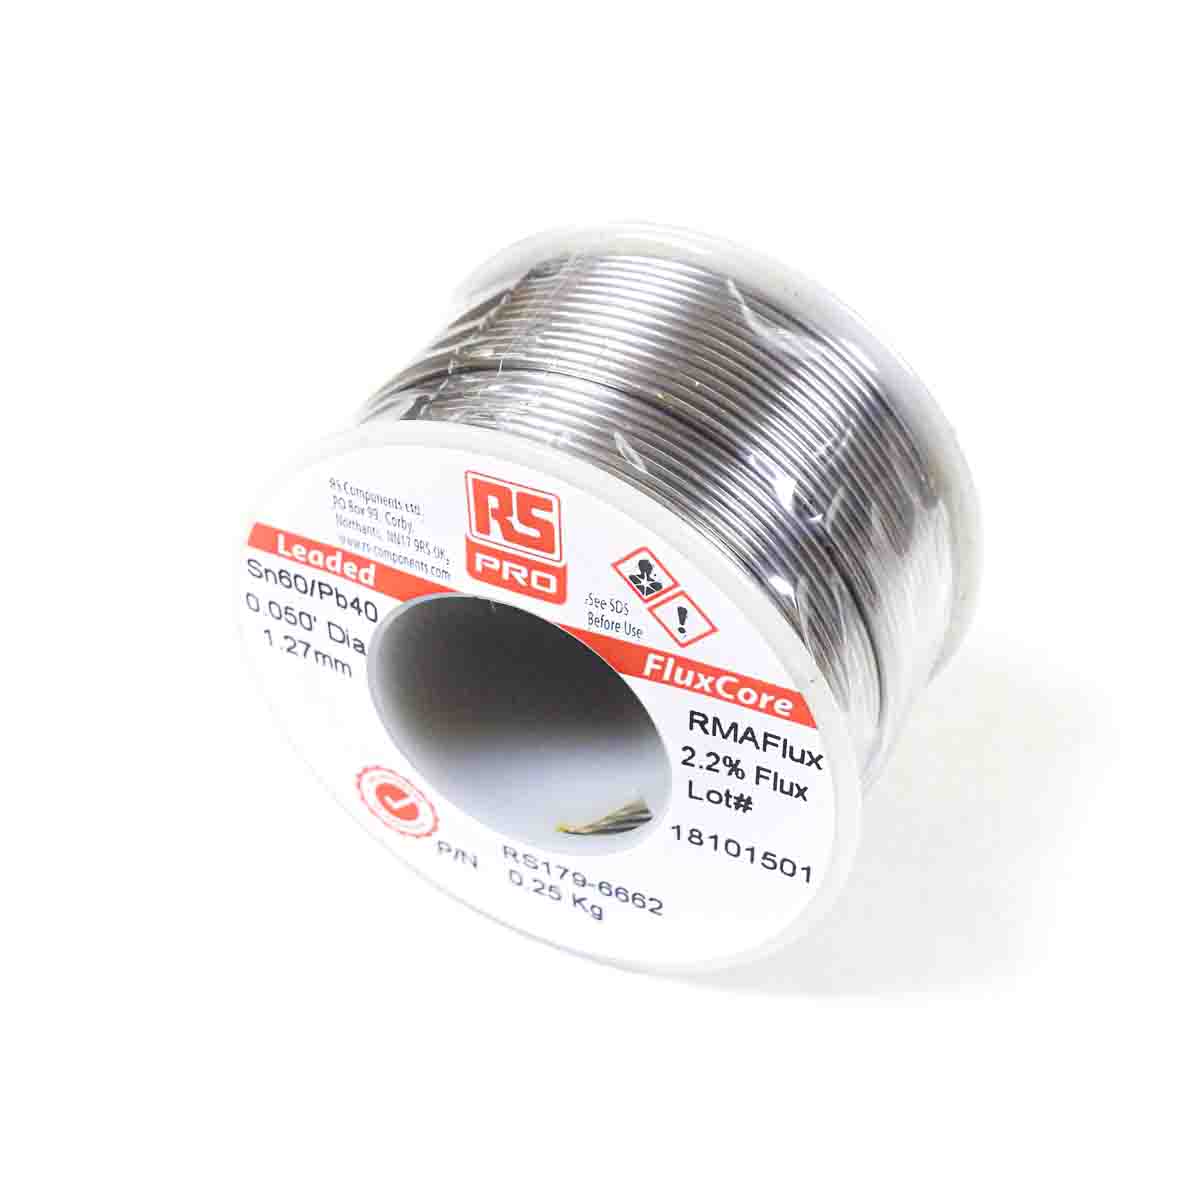 RS PRO Wire, 1.2mm Lead solder, 183°C Melting Point